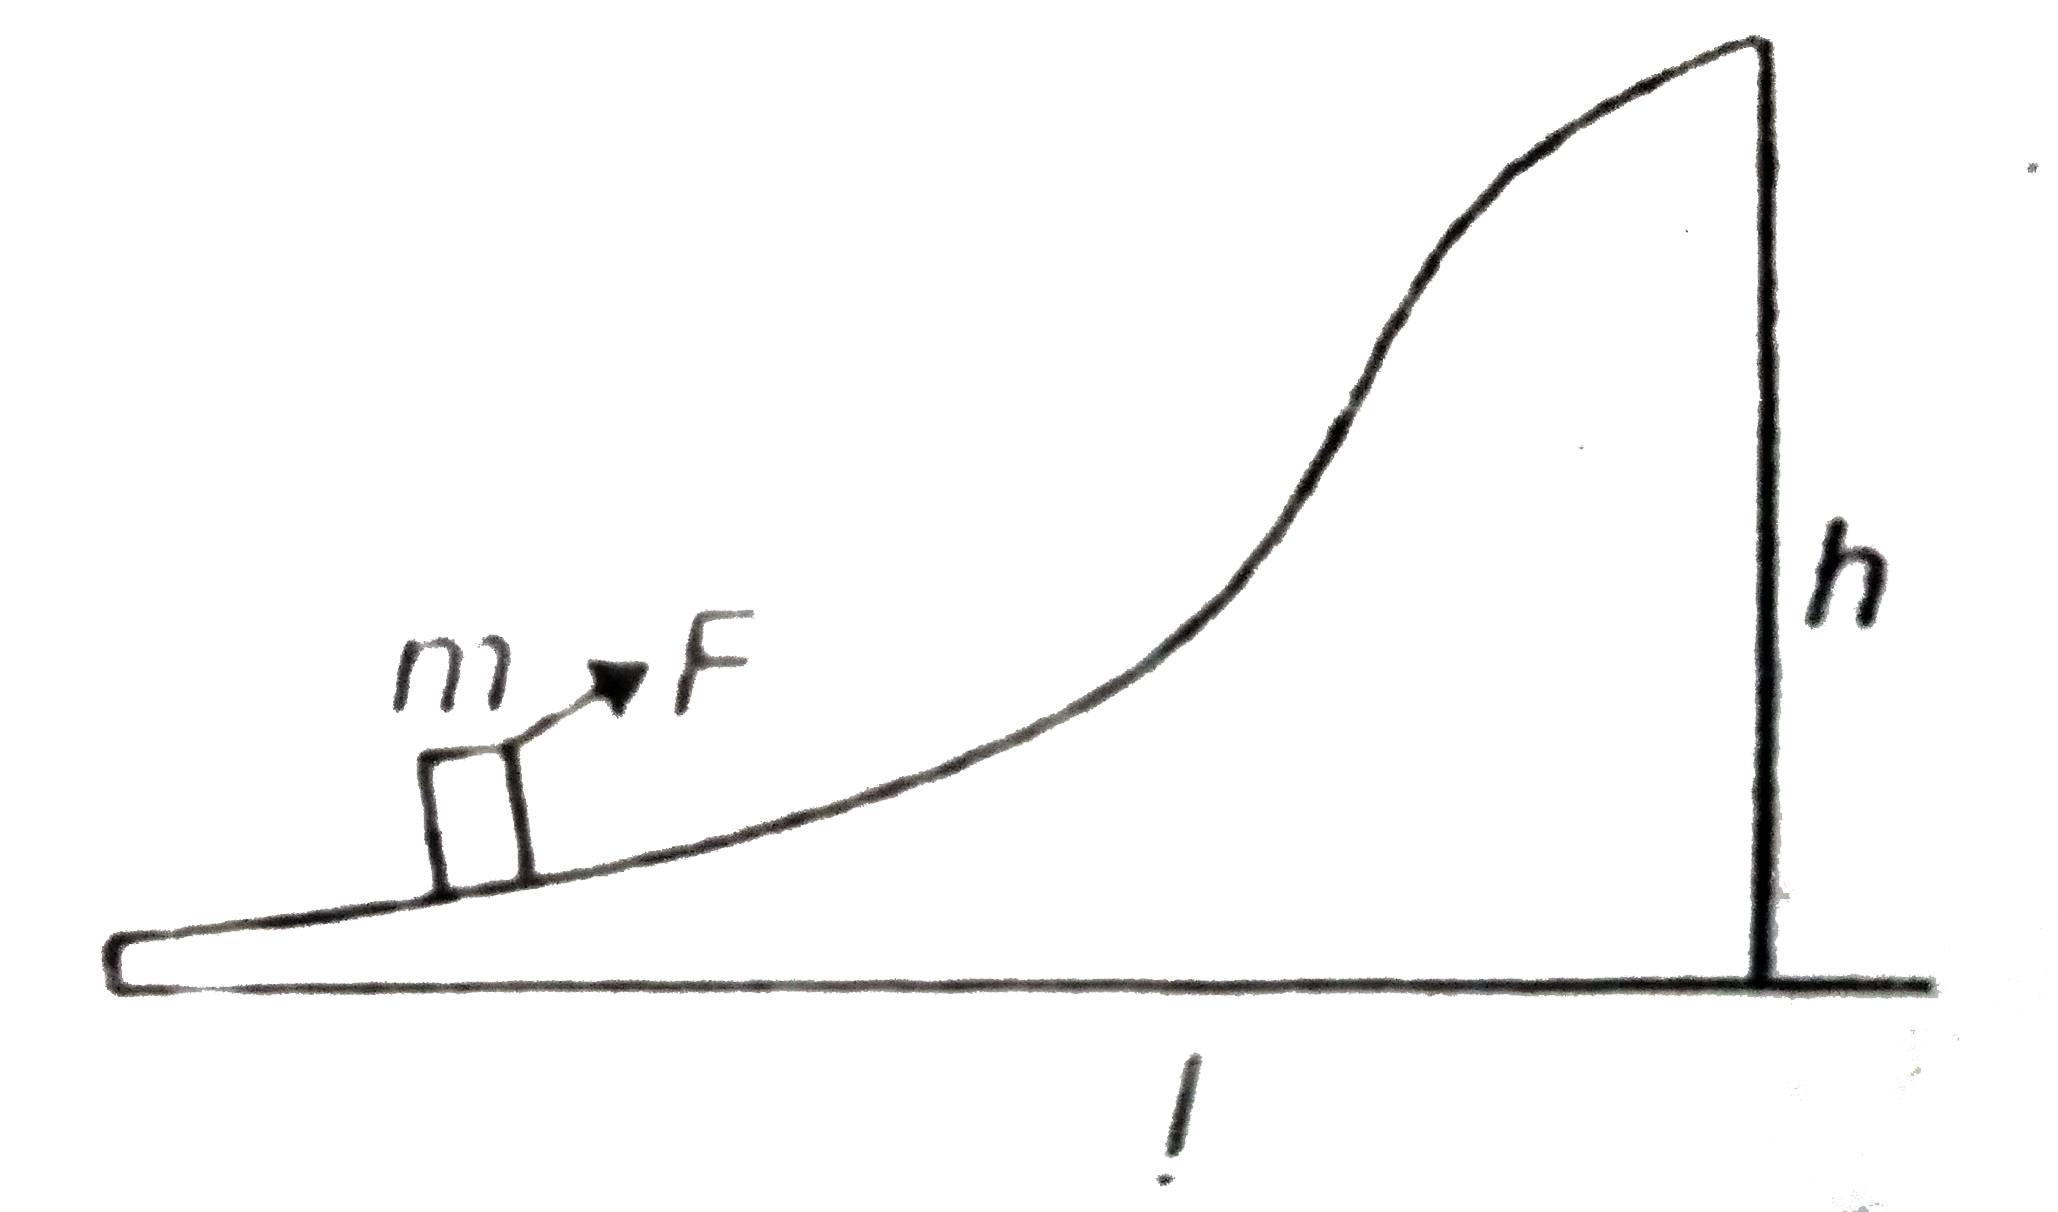 A body of mass m was slowly pulled up the hill by a force F which at each point was directed along the tangent of the trajectory. All surfaces are smooth. Find the work done by this force